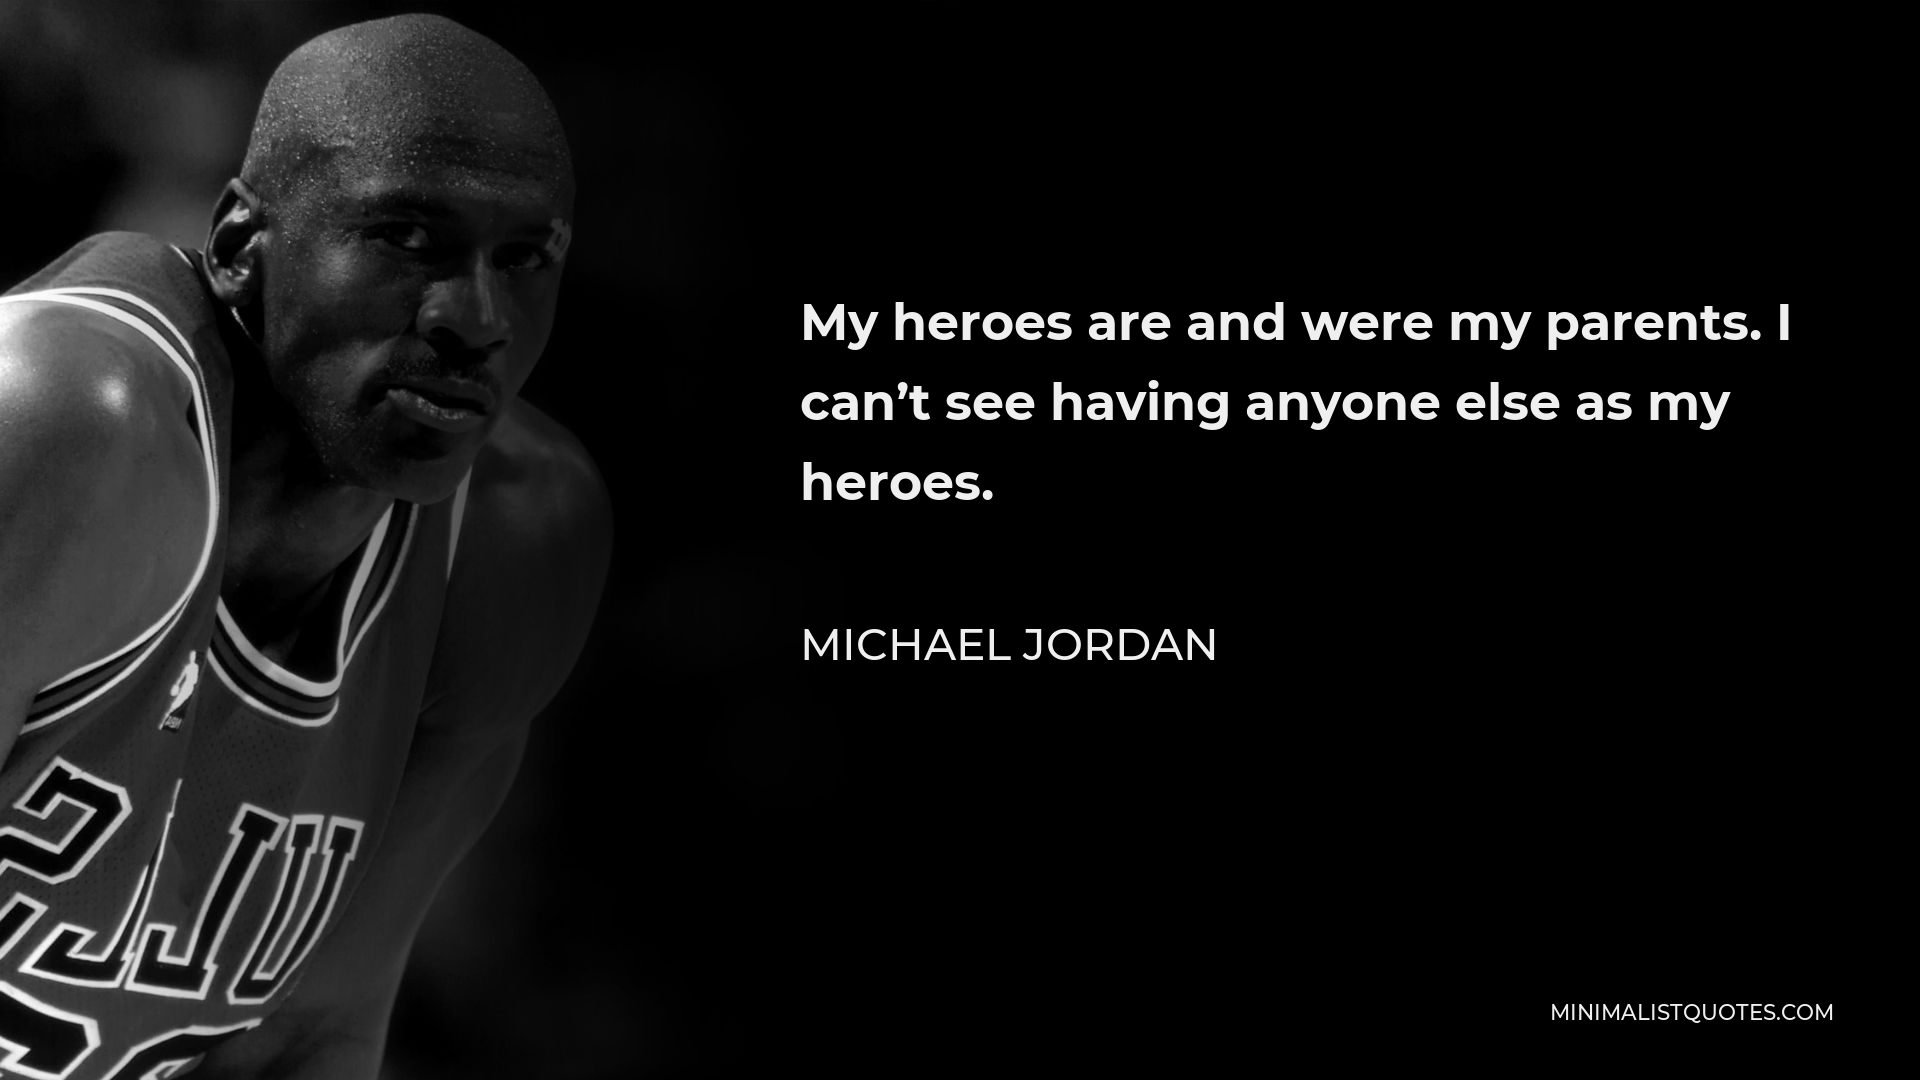 Michael Jordan Quote - My heroes are and were my parents. I can’t see having anyone else as my heroes.